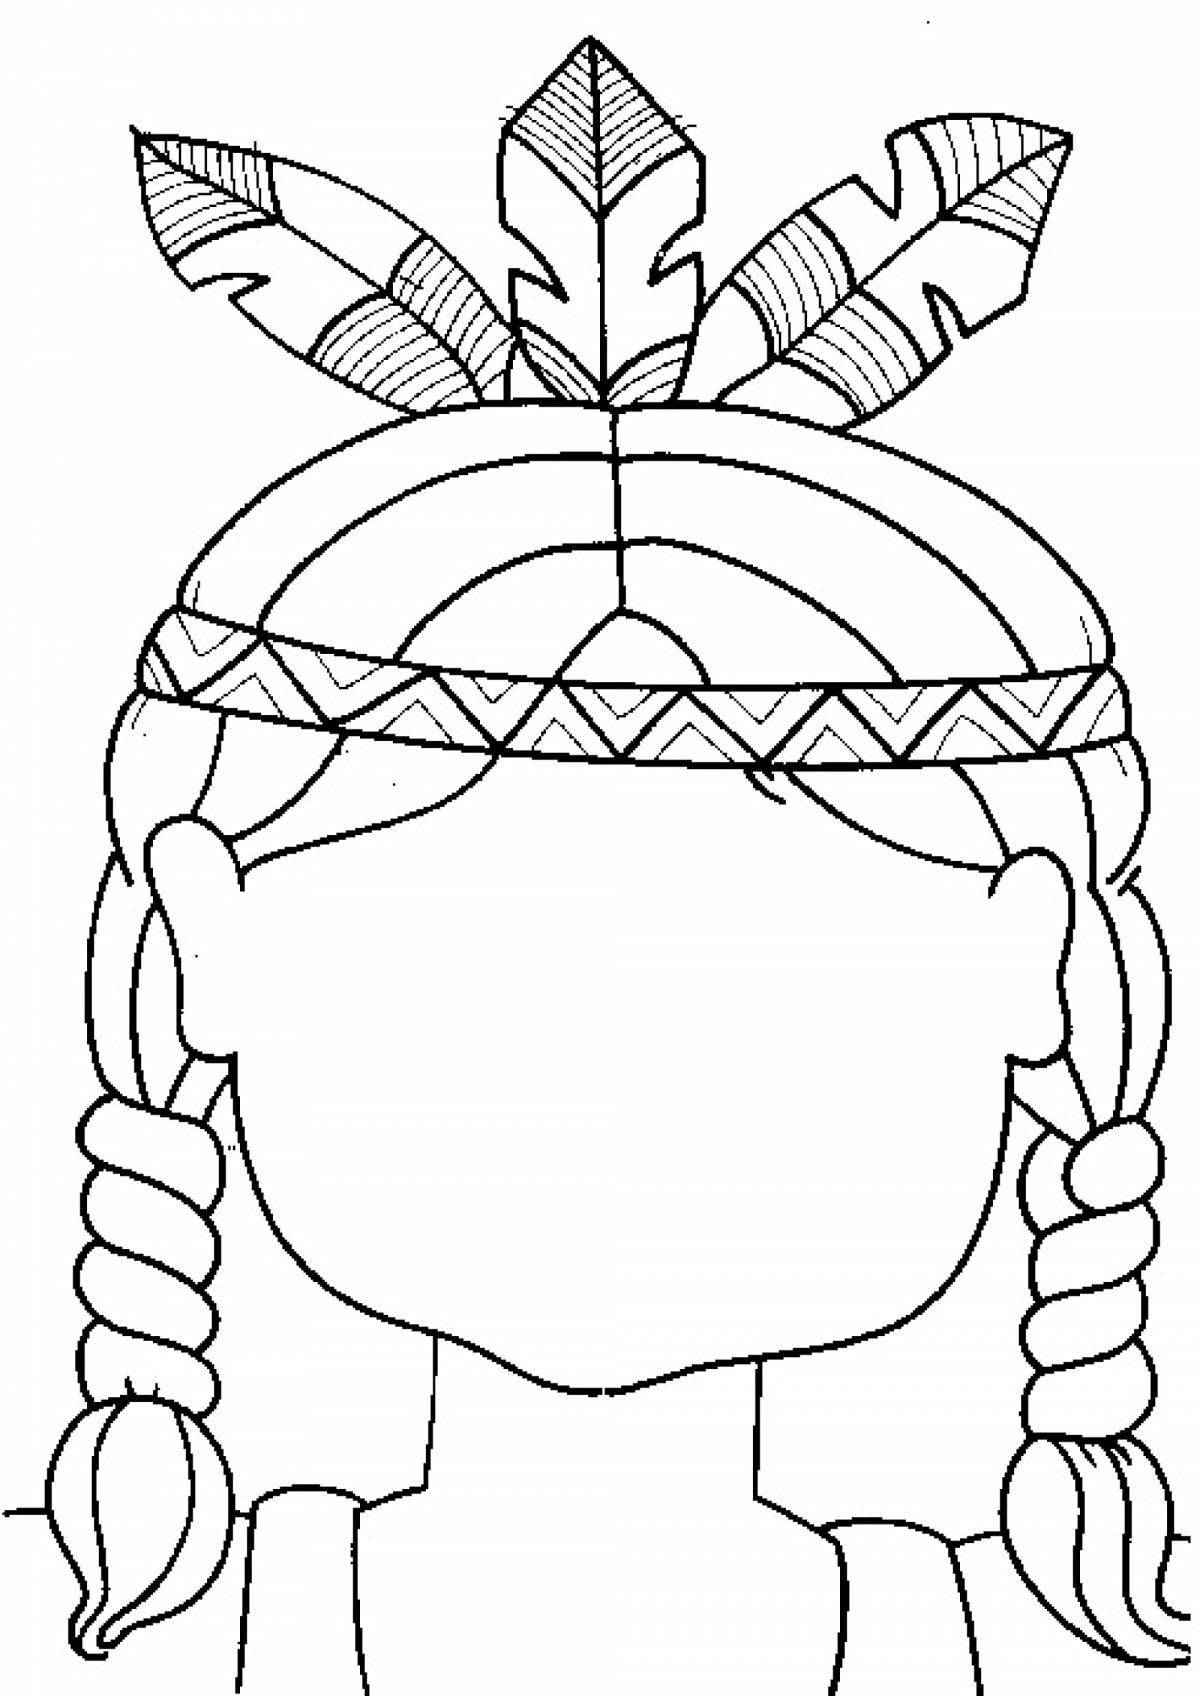 Face coloring page with content